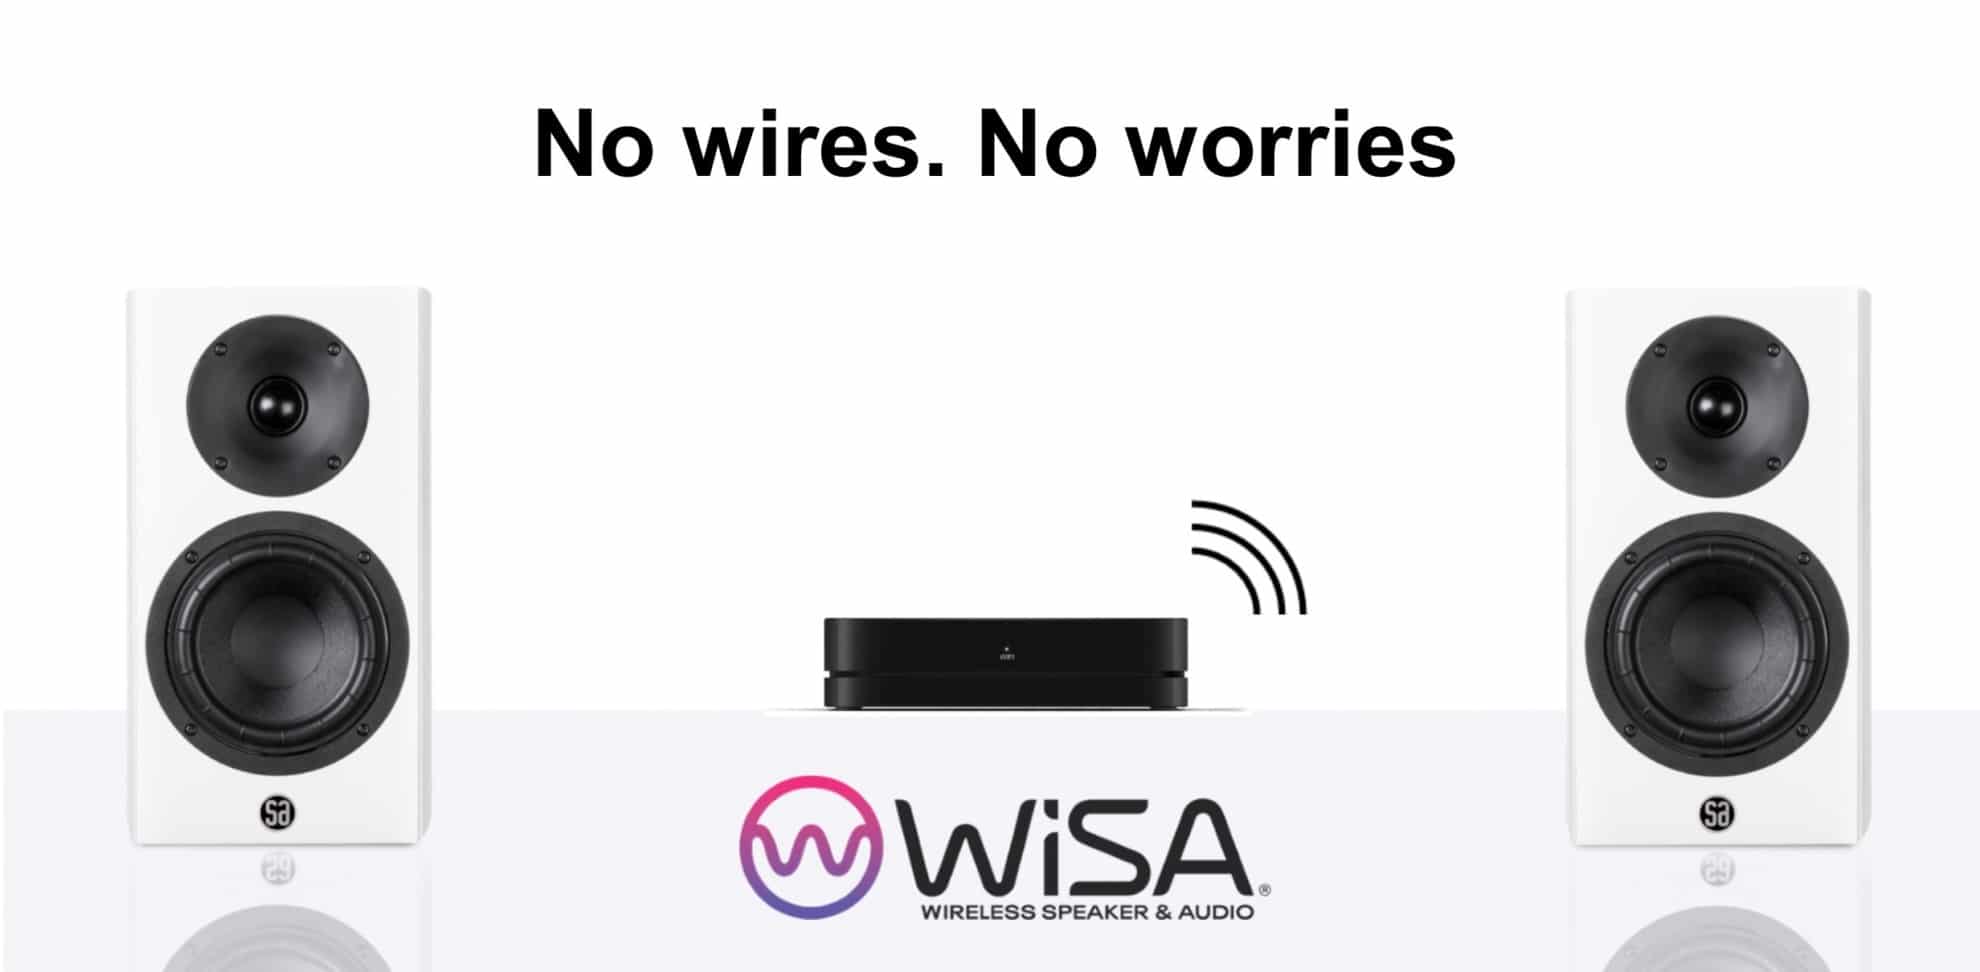 Here is the wireless technology you've 